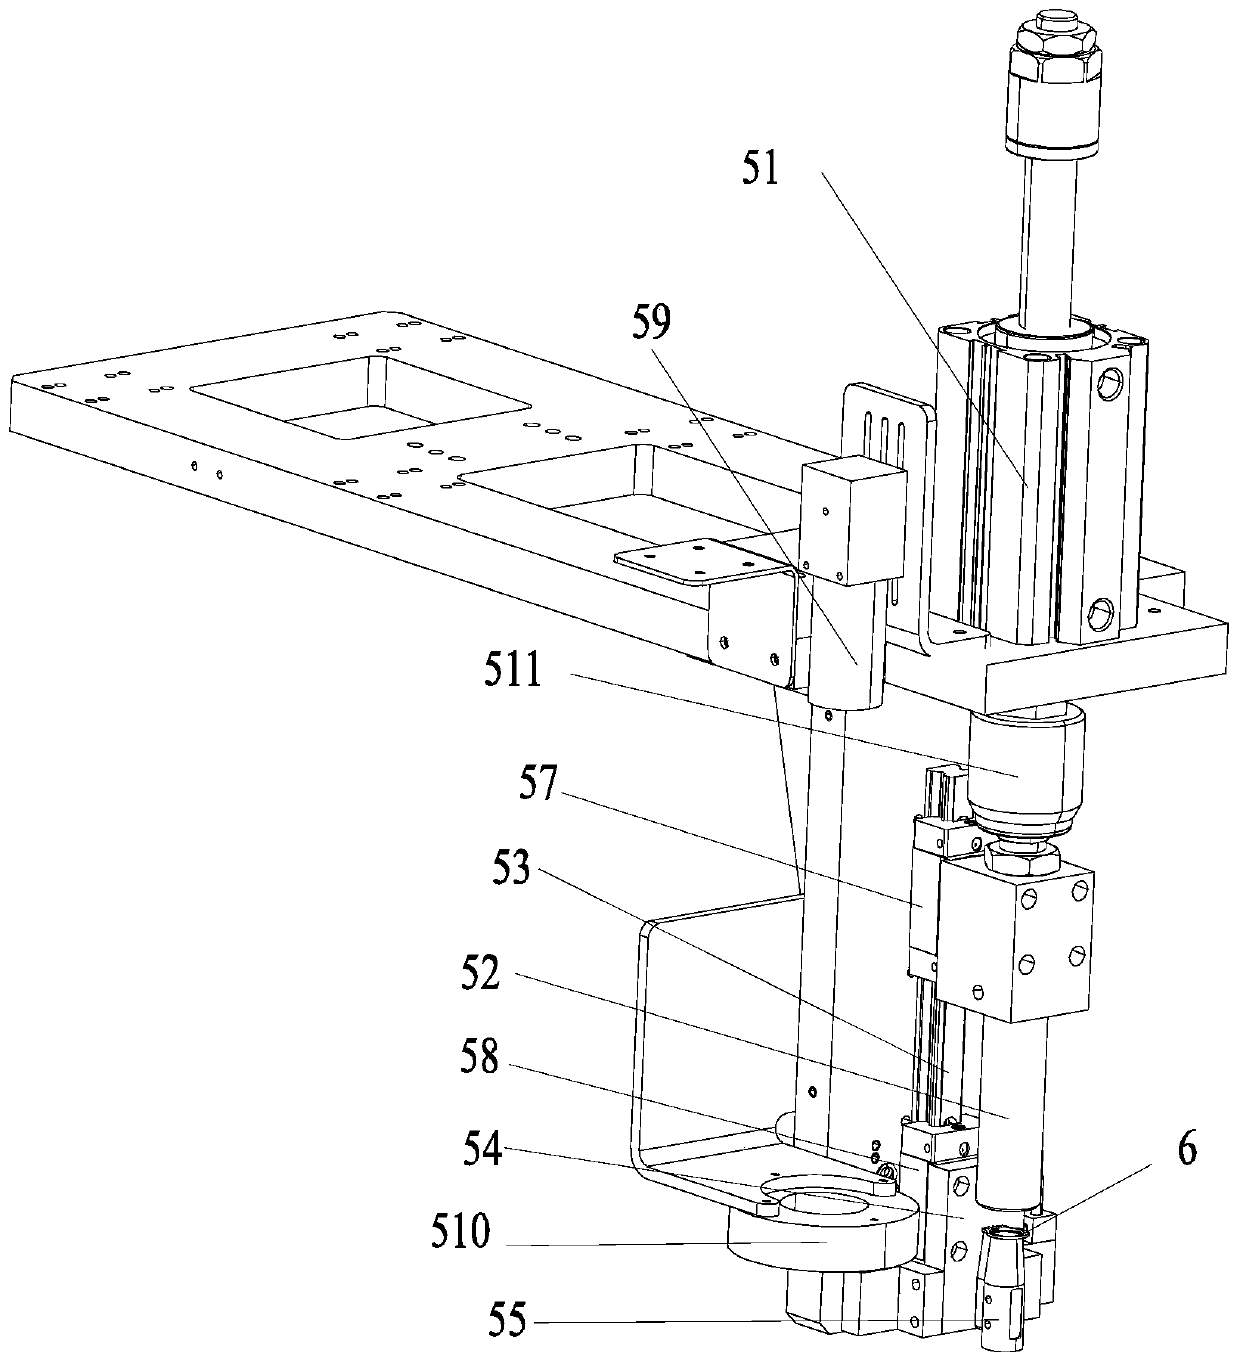 Device and method for assembling clamp spring for shaft